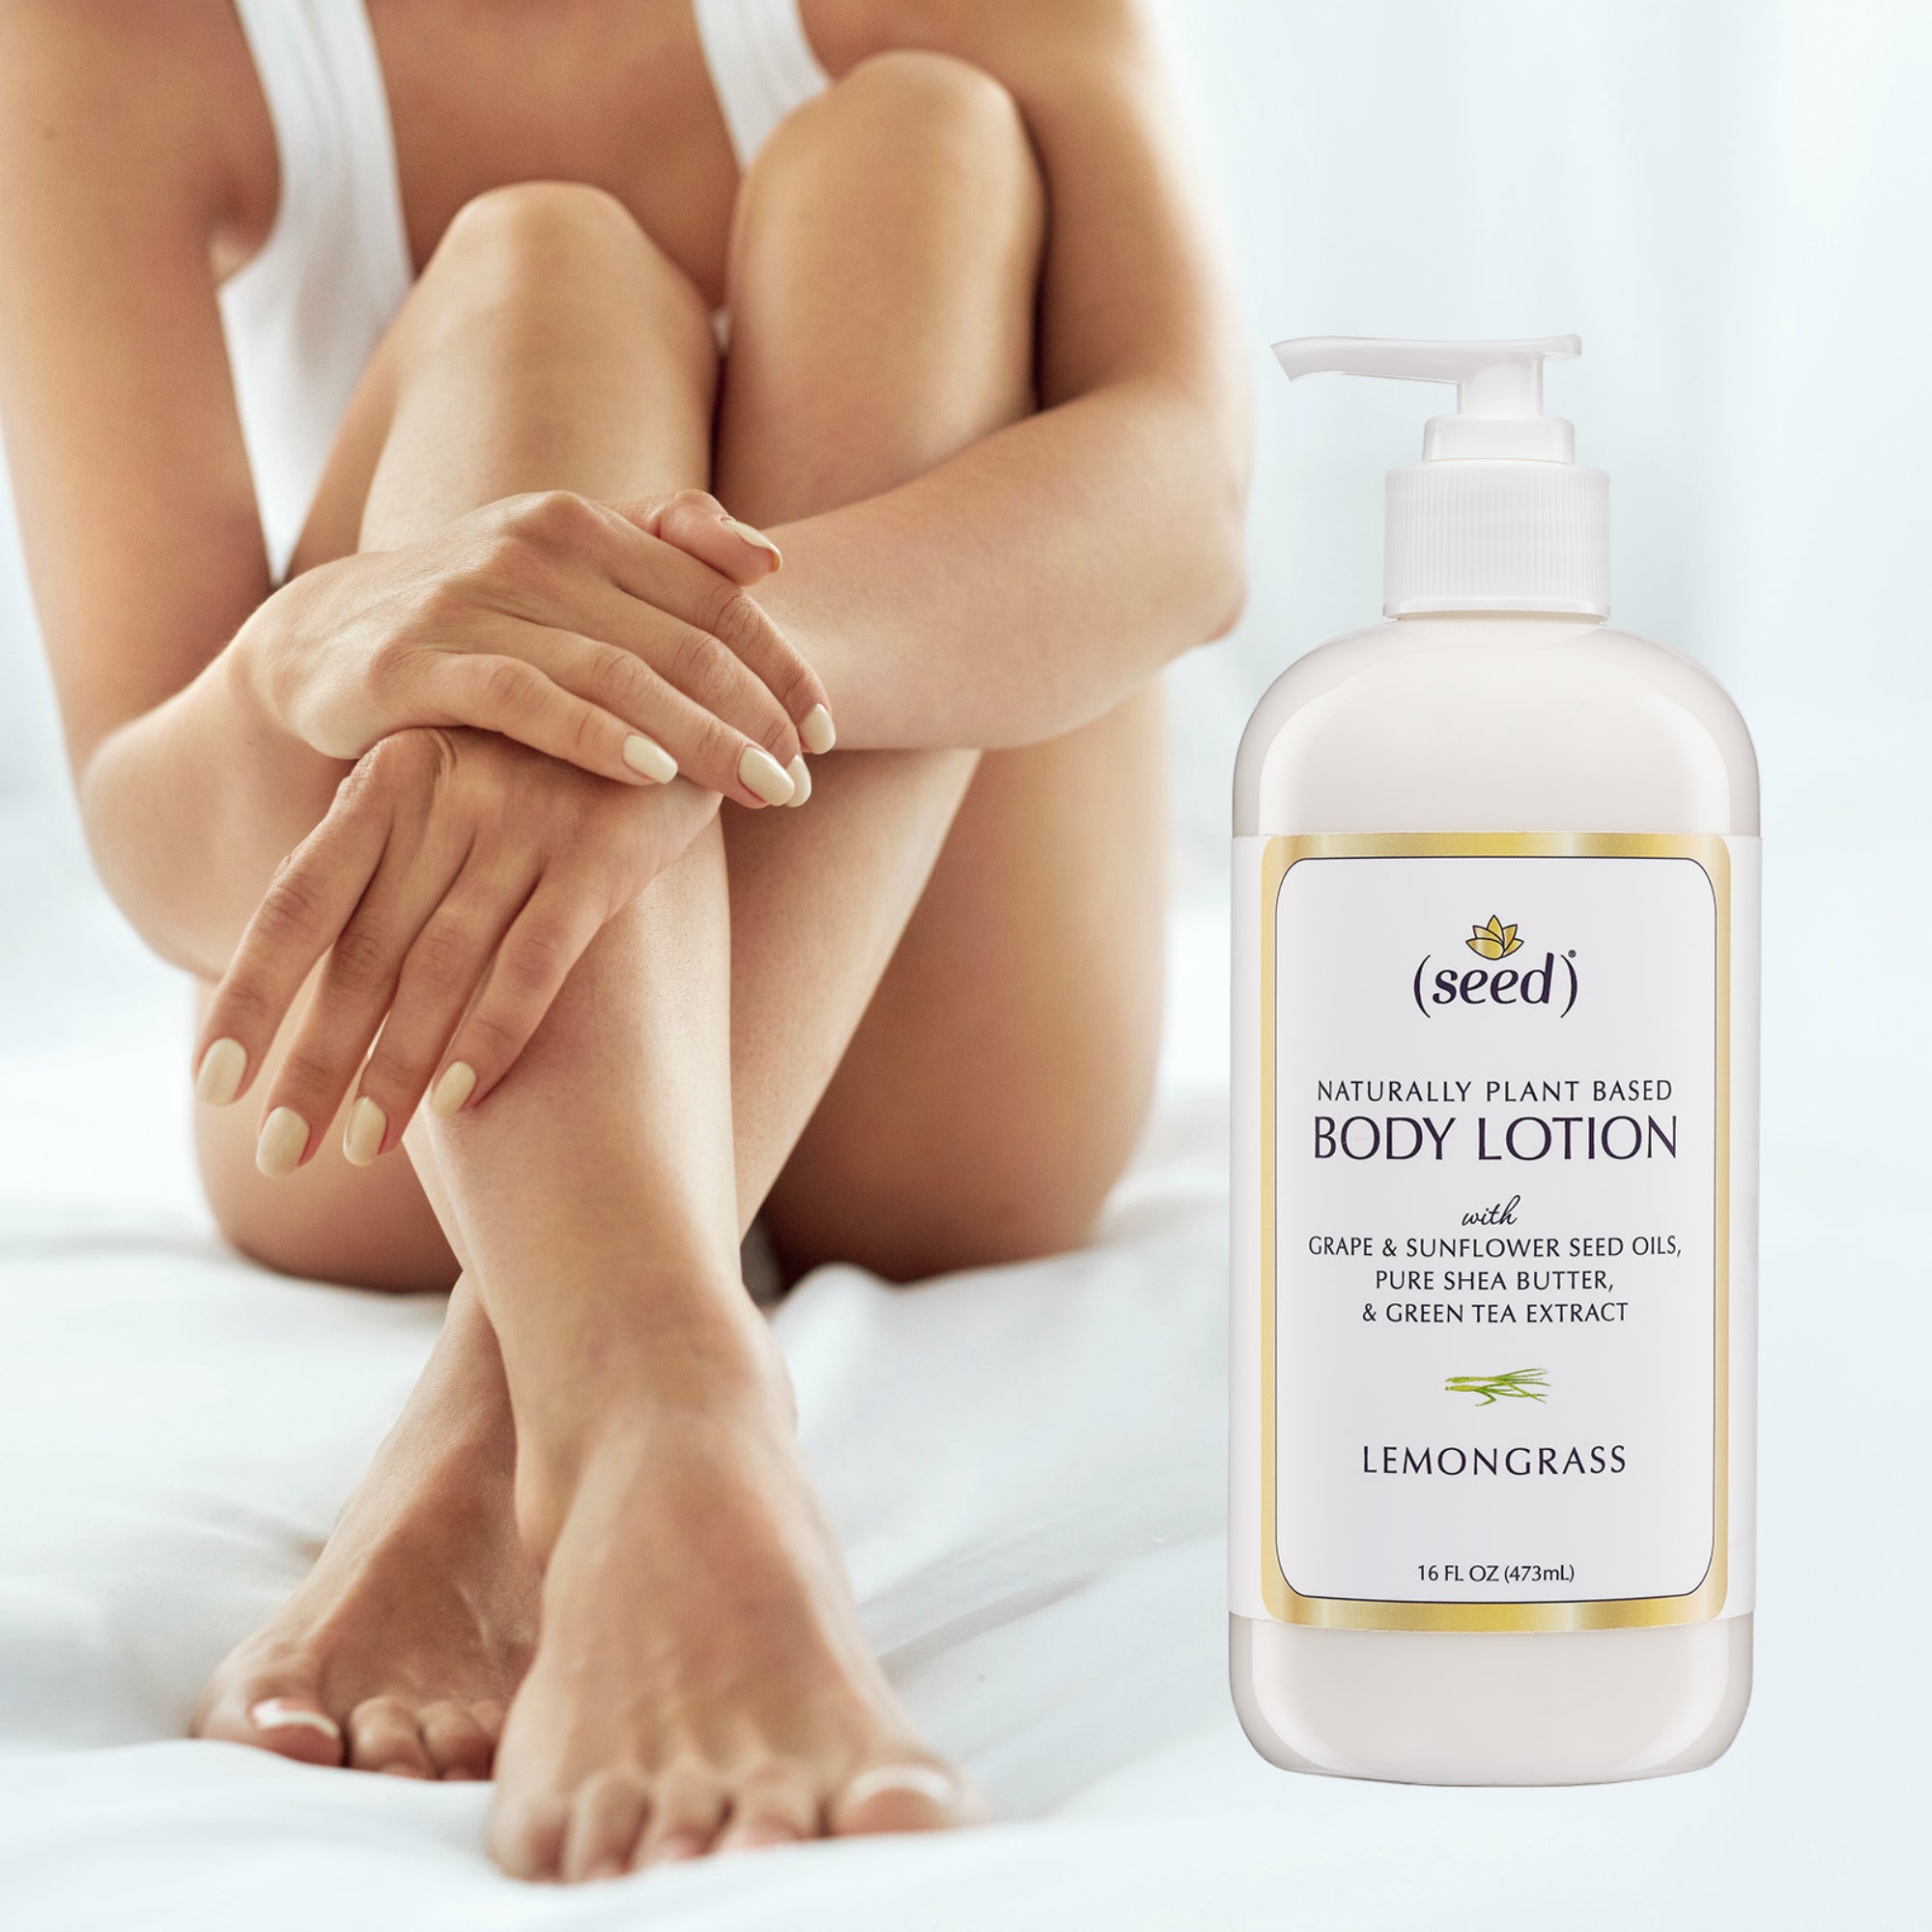 Seed Body Lotion soothes, softens, moisturizes